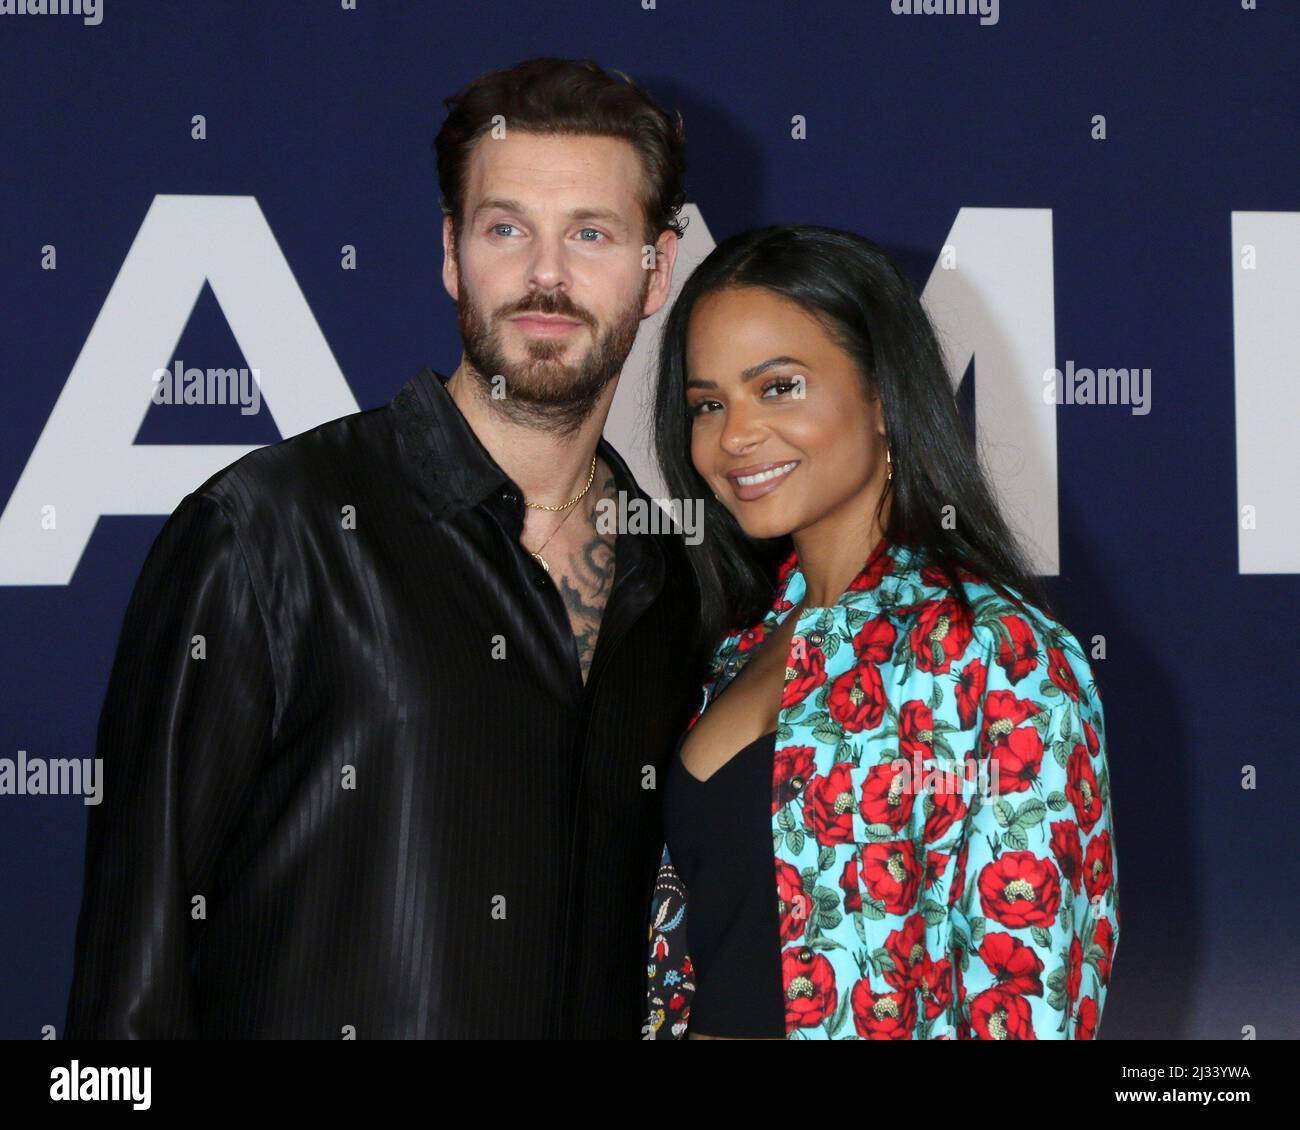 Los Angeles, CA. 4th Apr, 2022. Matt Pokora, Christina Milian at arrivals for AMBULANCE Premiere, The Academy Museum of Motion Pictures, Los Angeles, CA April 4, 2022. Credit: Priscilla Grant/Everett Collection/Alamy Live News Stock Photo